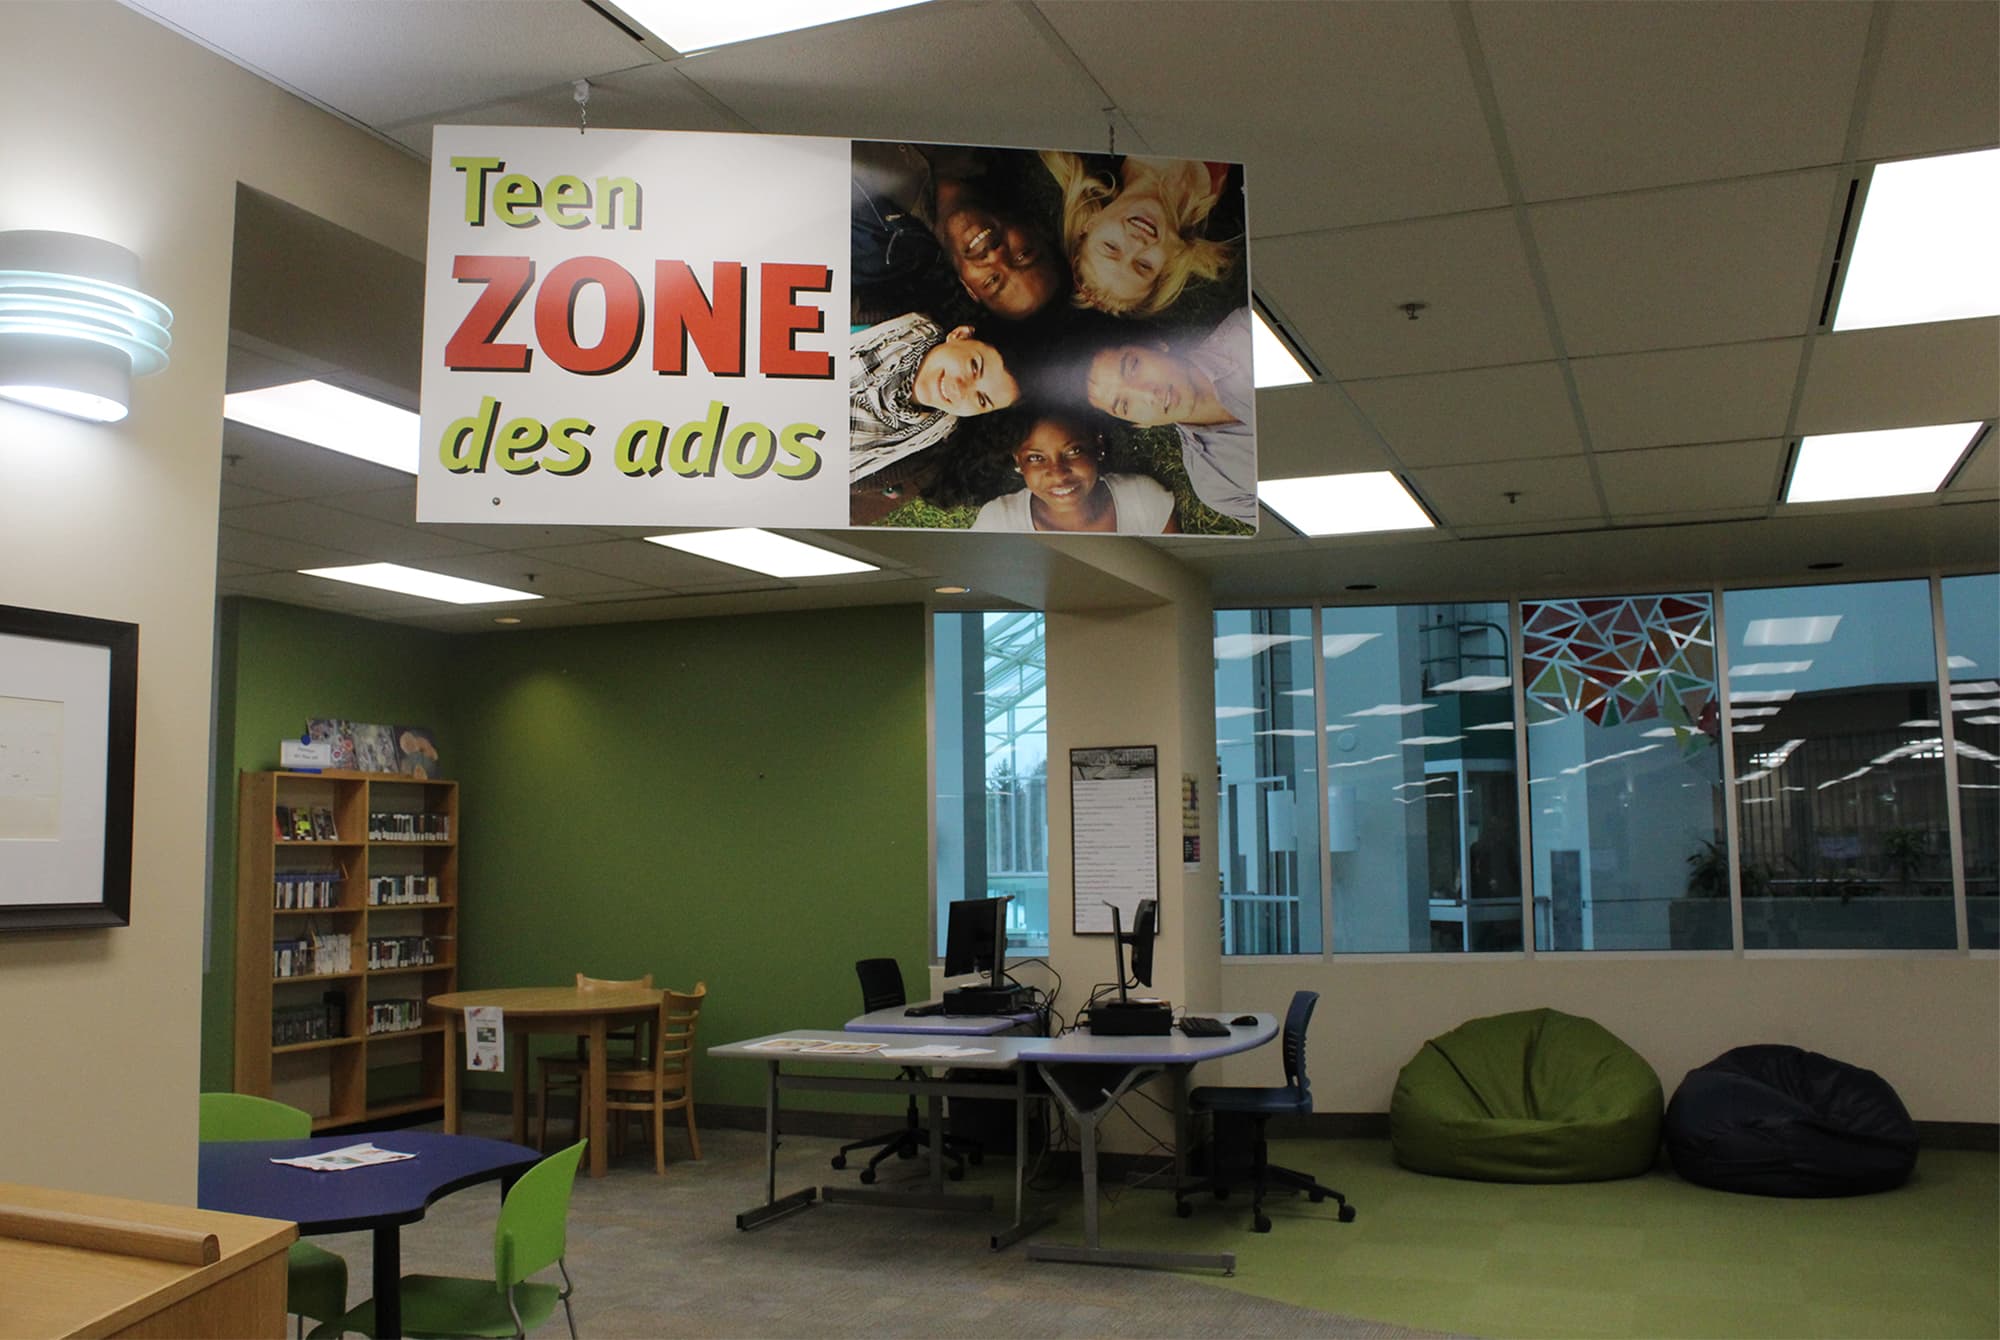 The Centrepointe branch's Teen Zone.